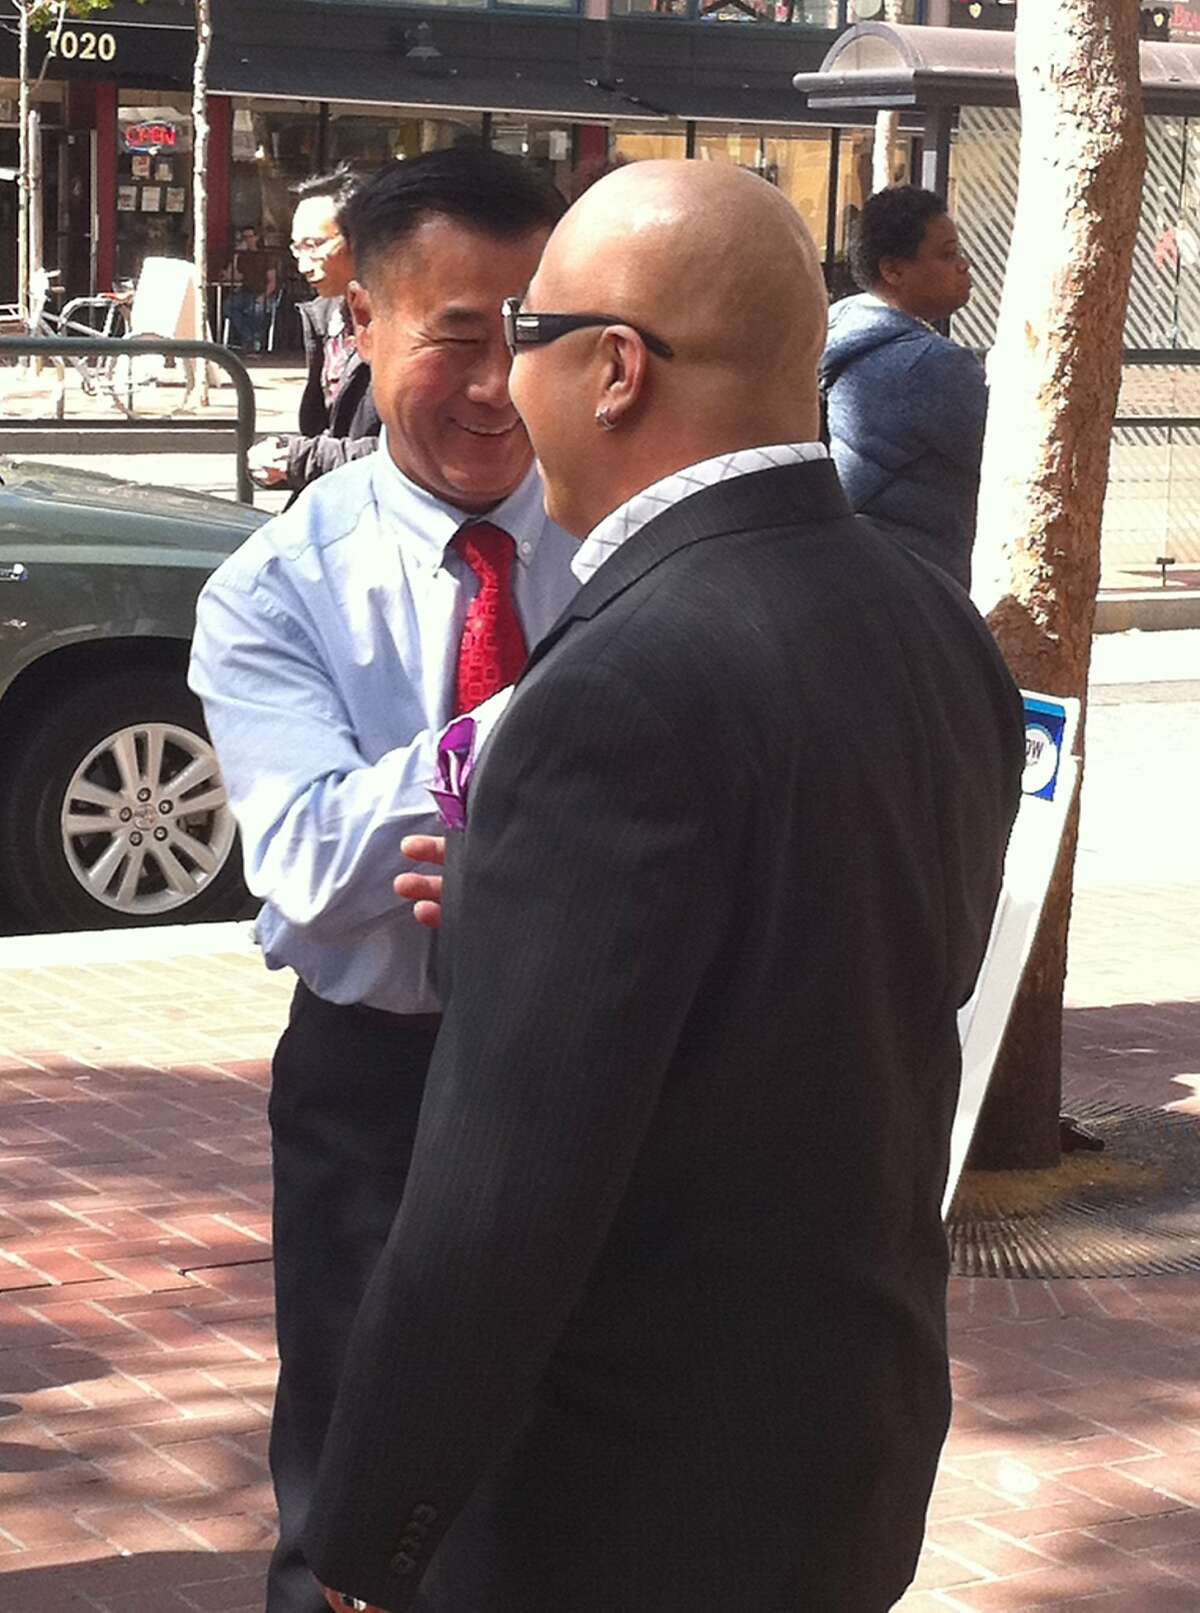 Leland Yee, left, talks with Raymond "Shrimp Boy" Chow during a rally for a candidate for the city Board of Supervisors in 2010.